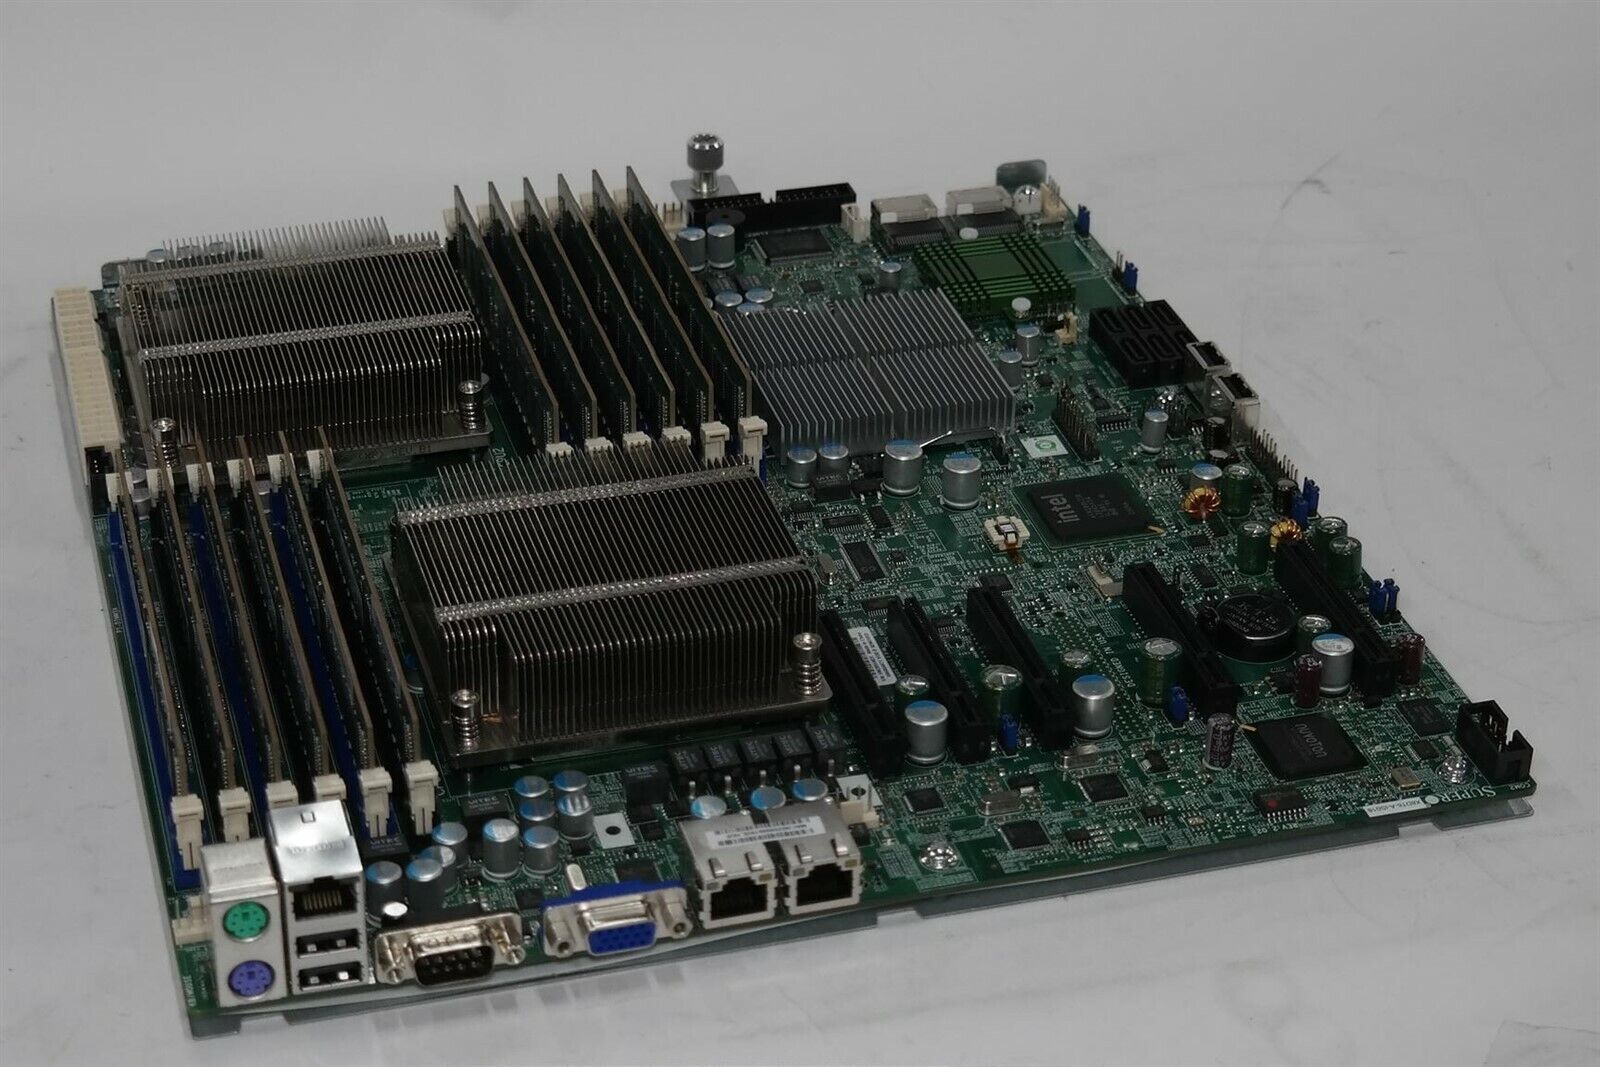 SUPERMICRO X8DT6-A-IS018 XEON LGA1366 EXTENDED-ATX MOTHERBOARD 2X E5603 48GB RAM